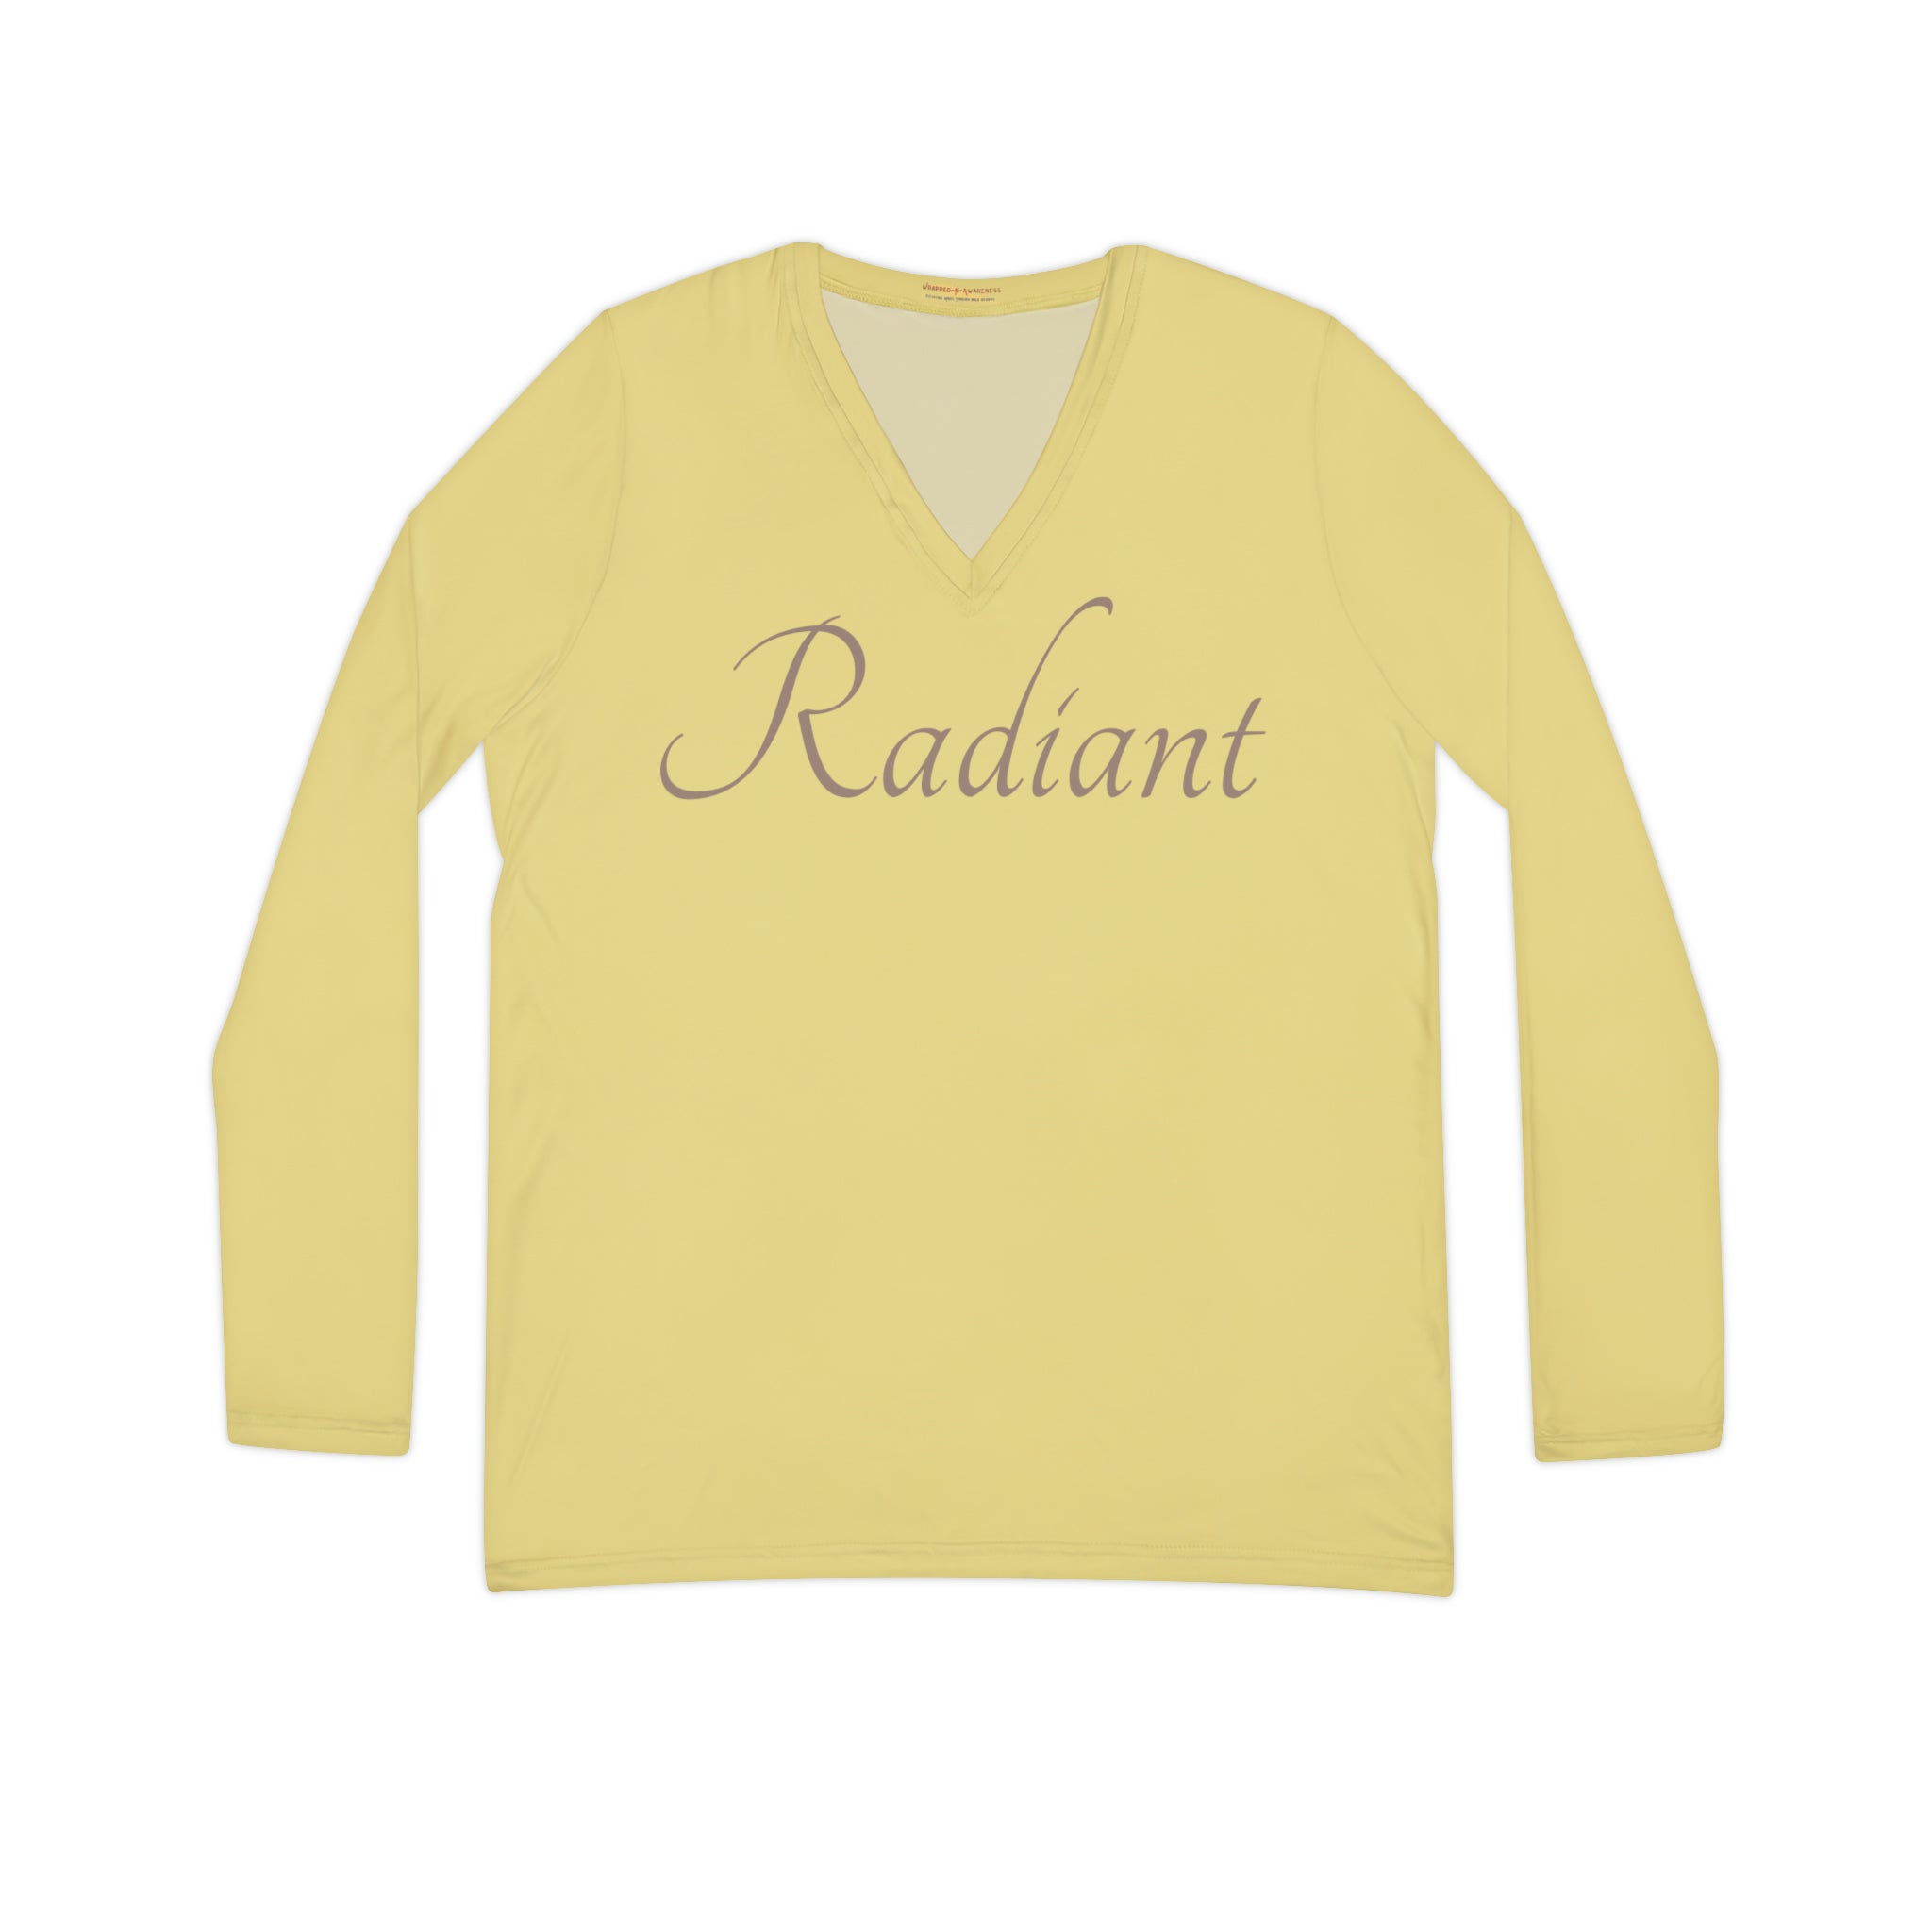 Radiant - Long Sleeve V-neck Shirt Casual Shirt Double Needle Stitching Everyday Wear Mental Health Donation Polyester Spandex Blend Radiant Shirt Statement Shirt All Over Prints 3706101838246272883_2048 Printify